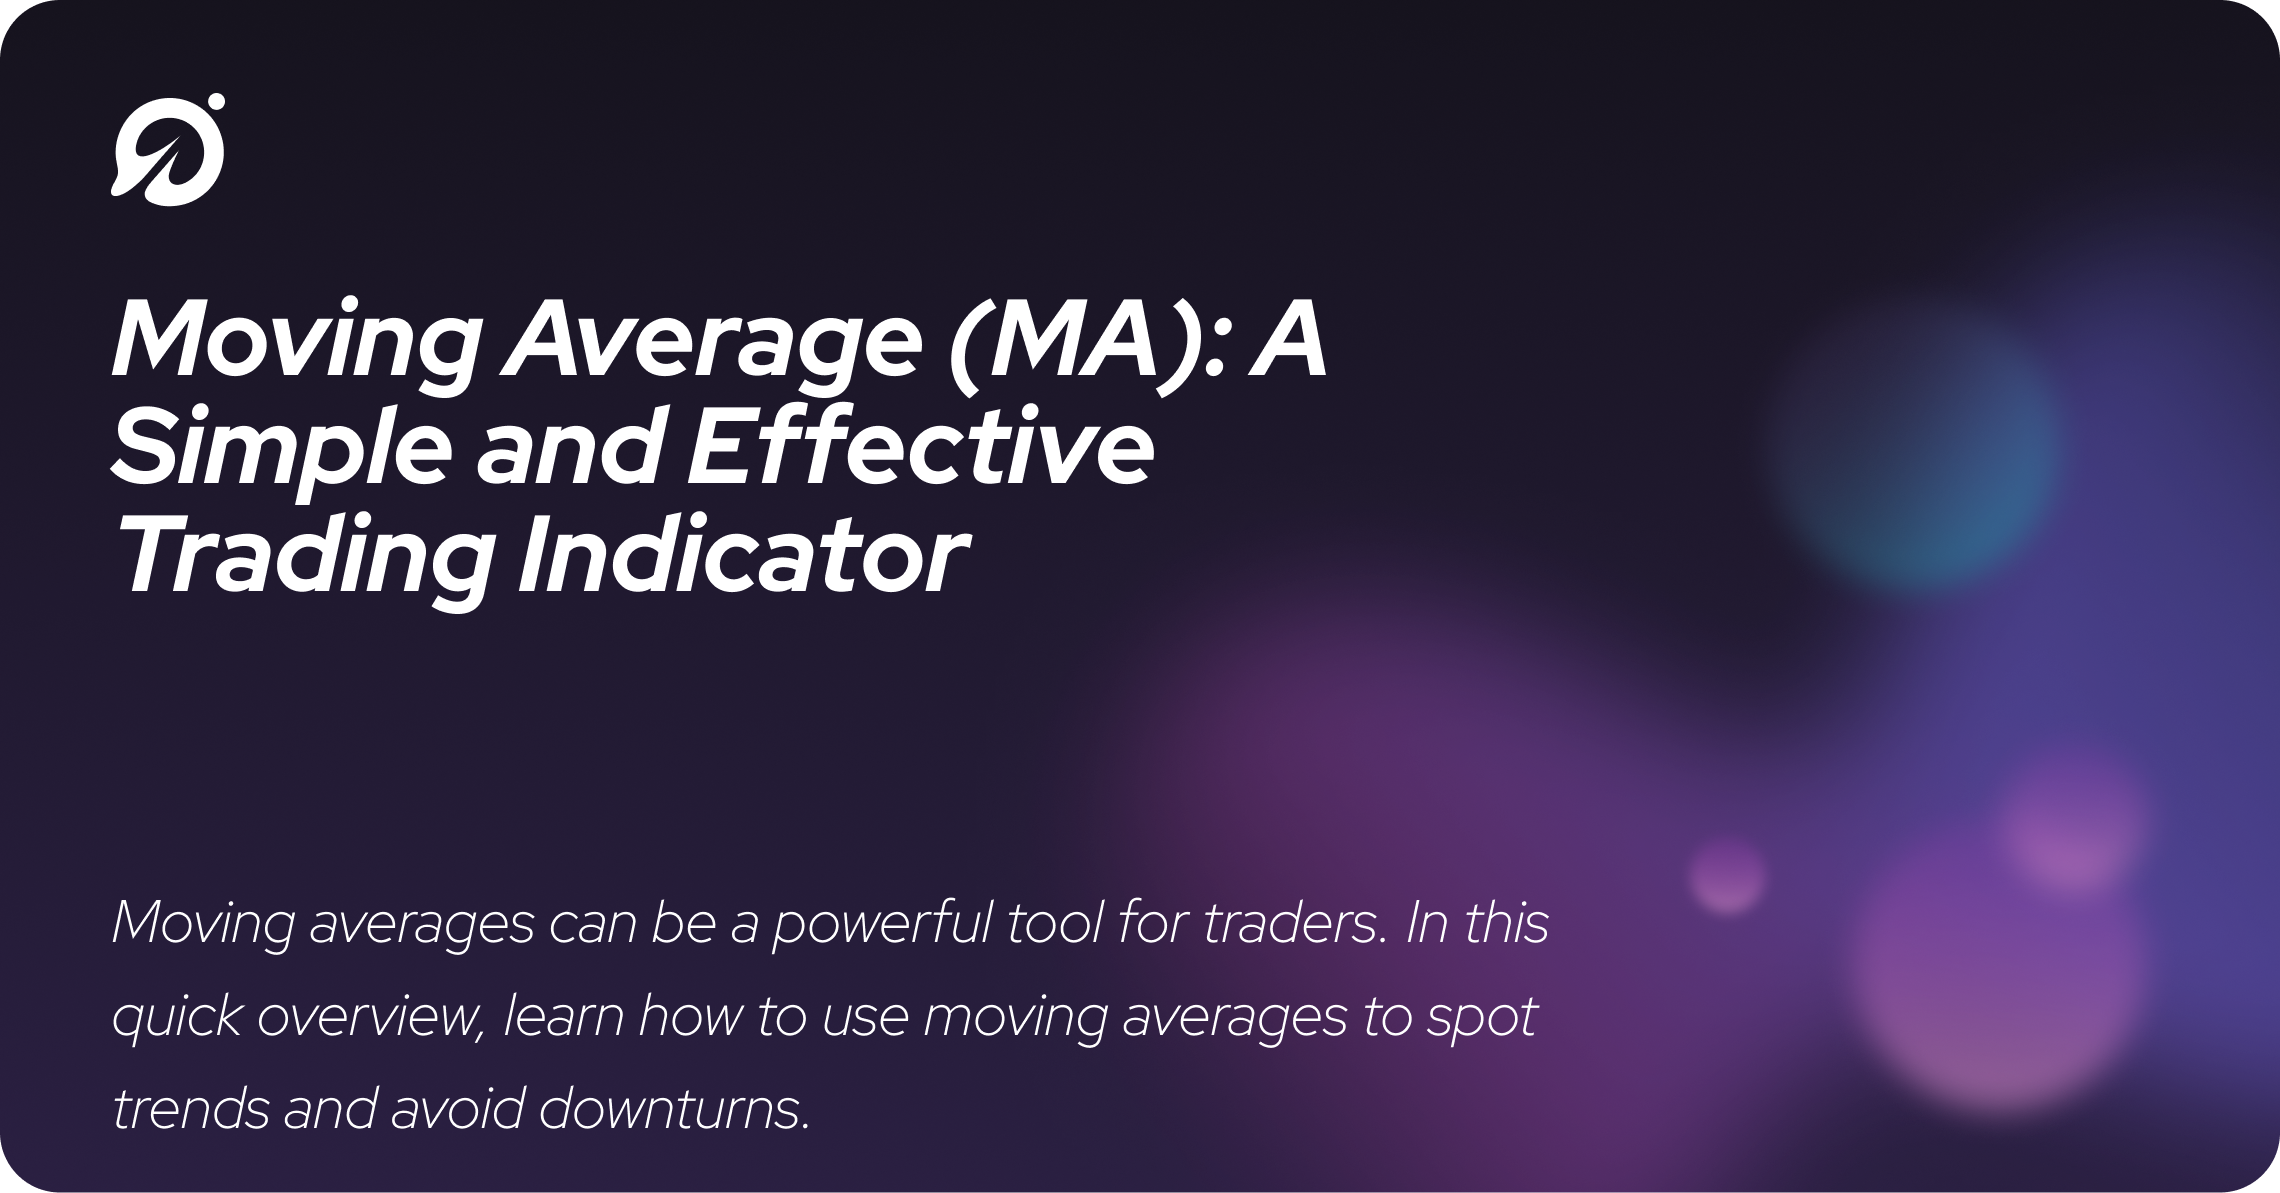 Moving Average (MA): A Simple and Effective Trading Indicator